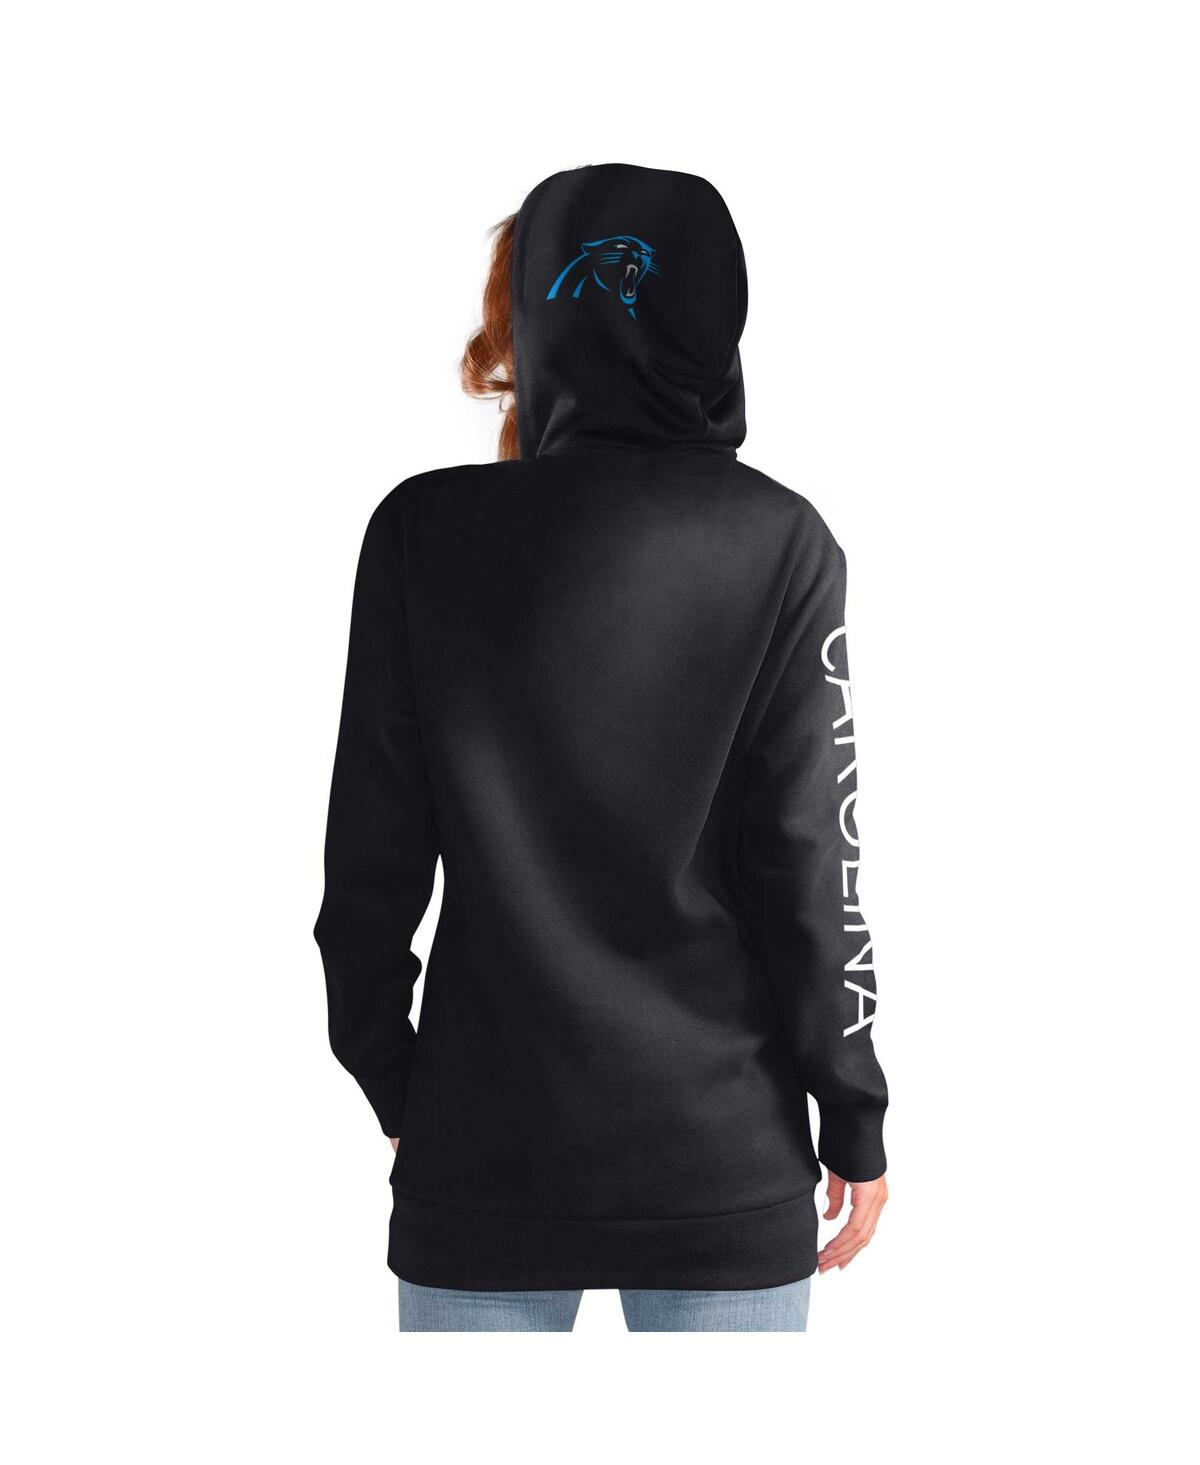 Shop G-iii 4her By Carl Banks Women's  Black Carolina Panthers Extra Inning Pullover Hoodie